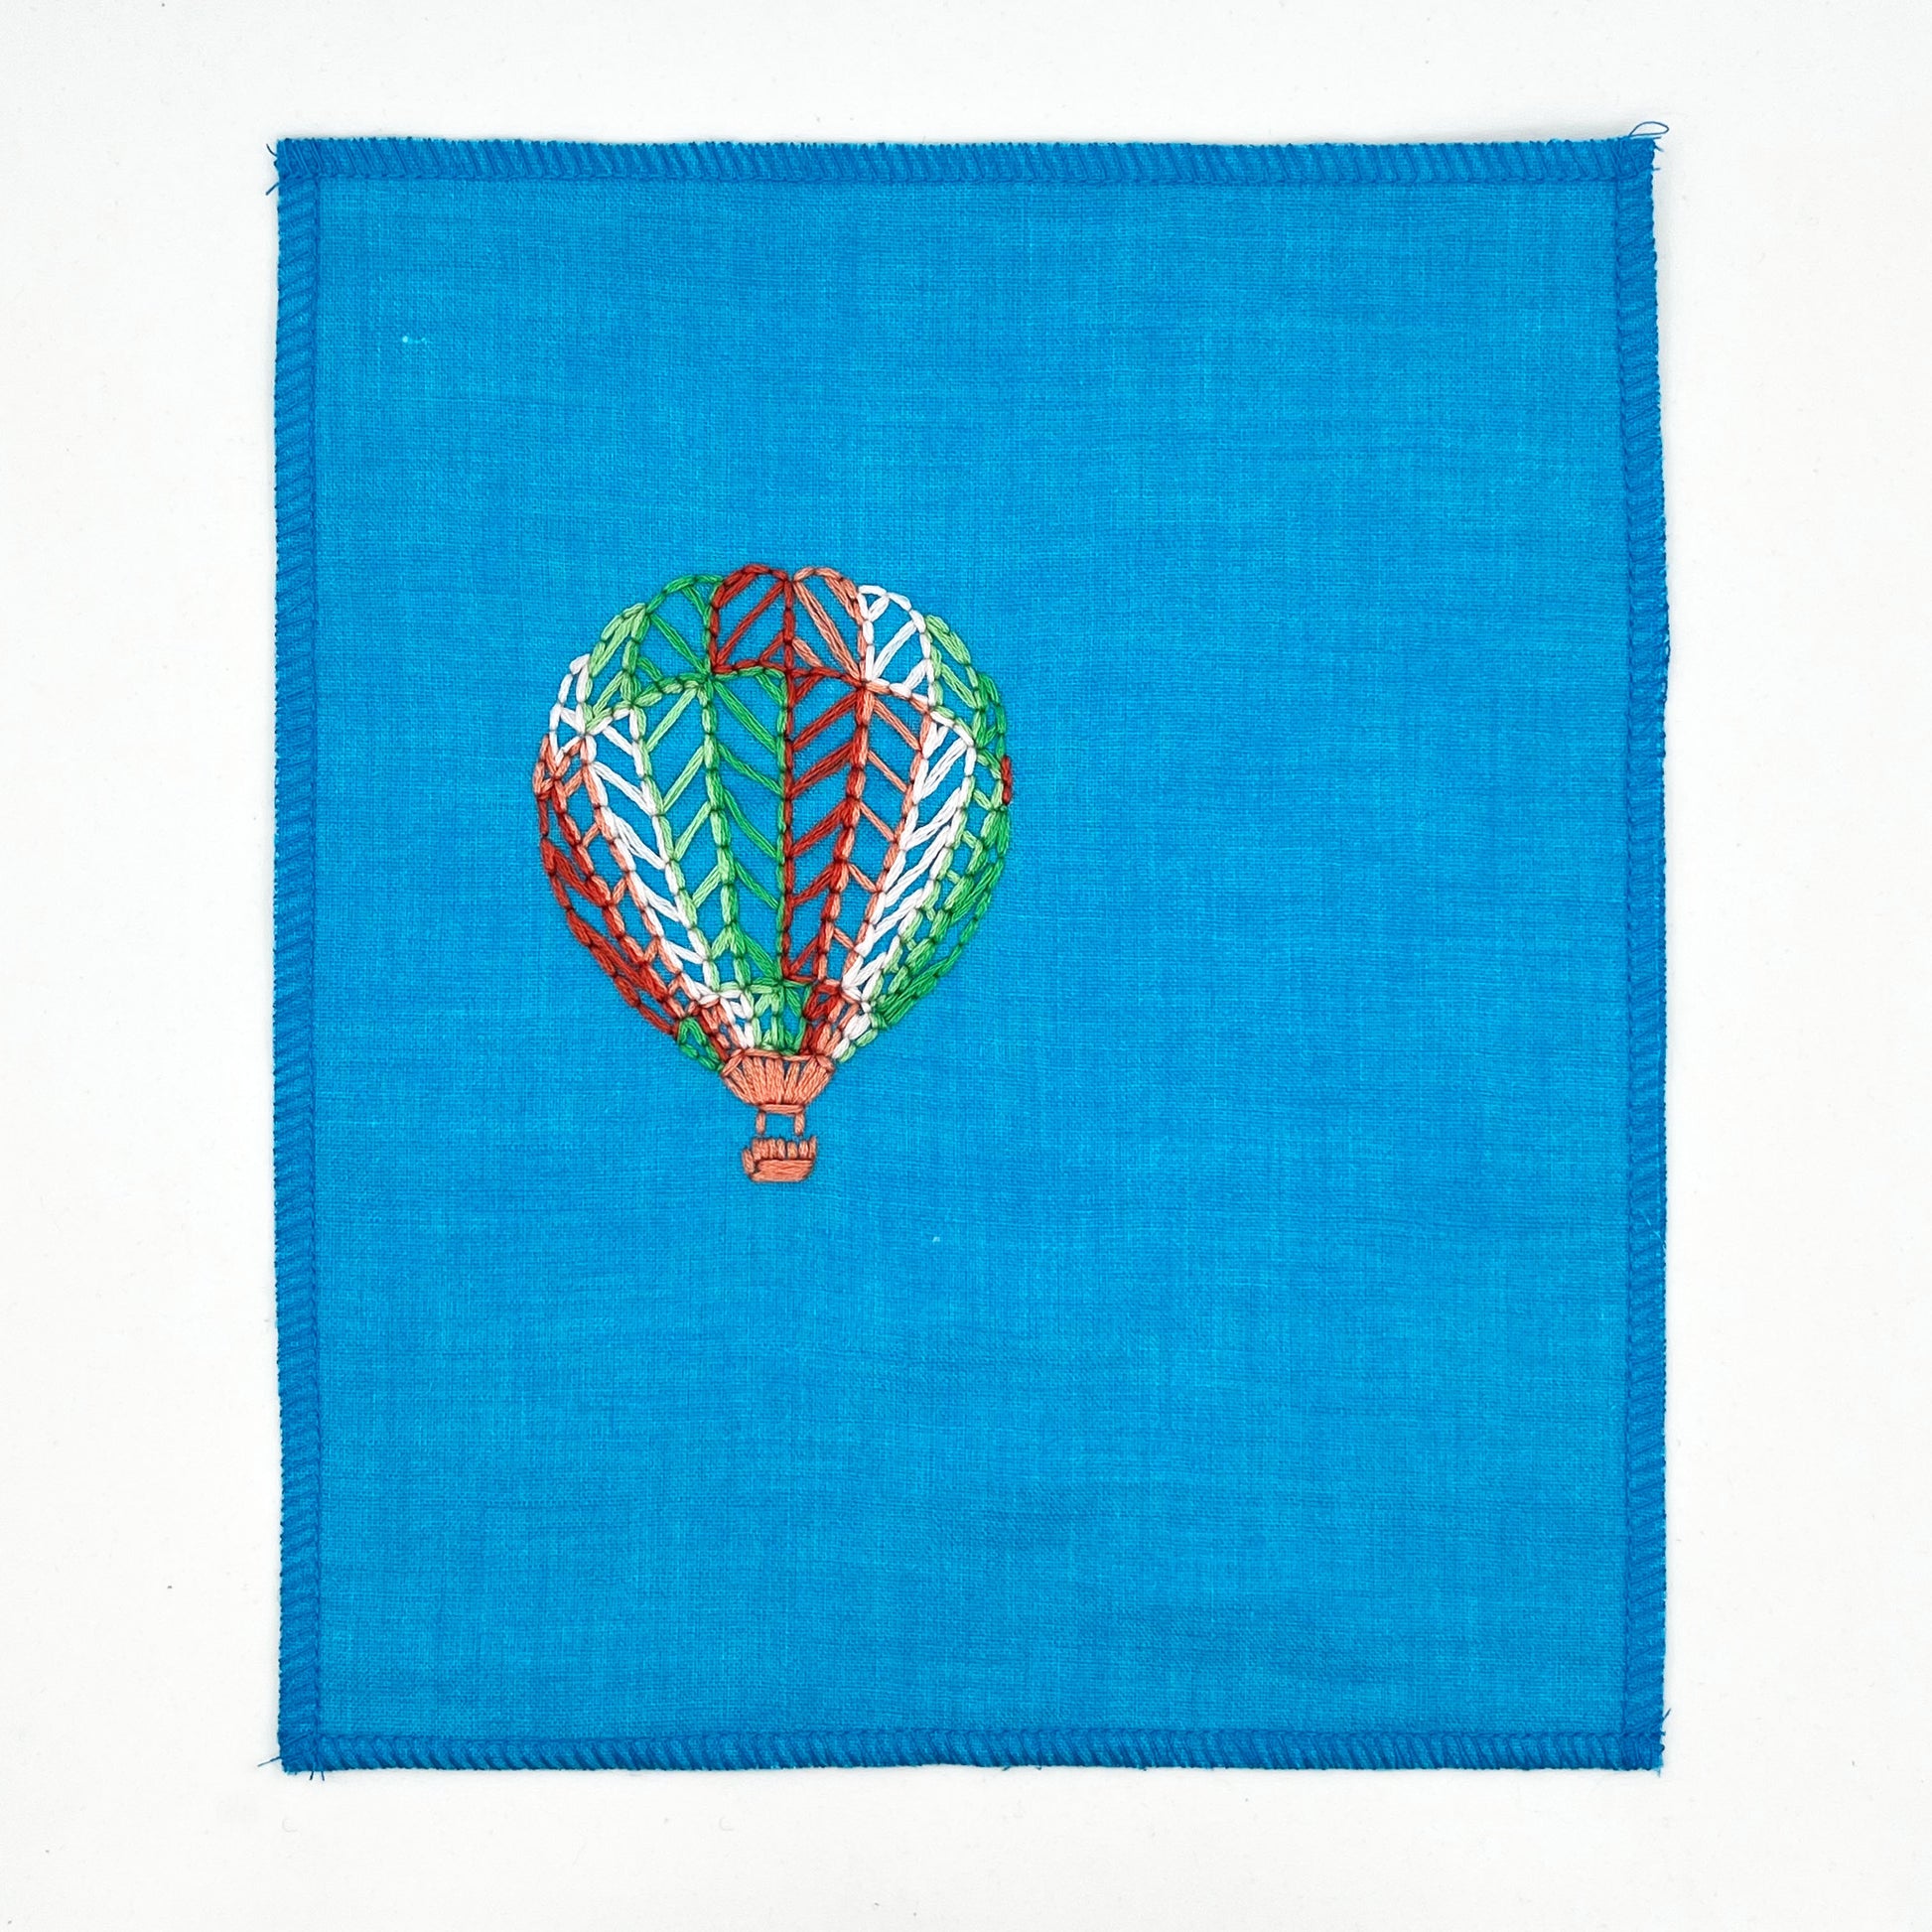 a bright blue fabric wall hanging with a hot air balloon stitched on it off center, in red, pink, light pink, light green and dark green colored thread, on a white background